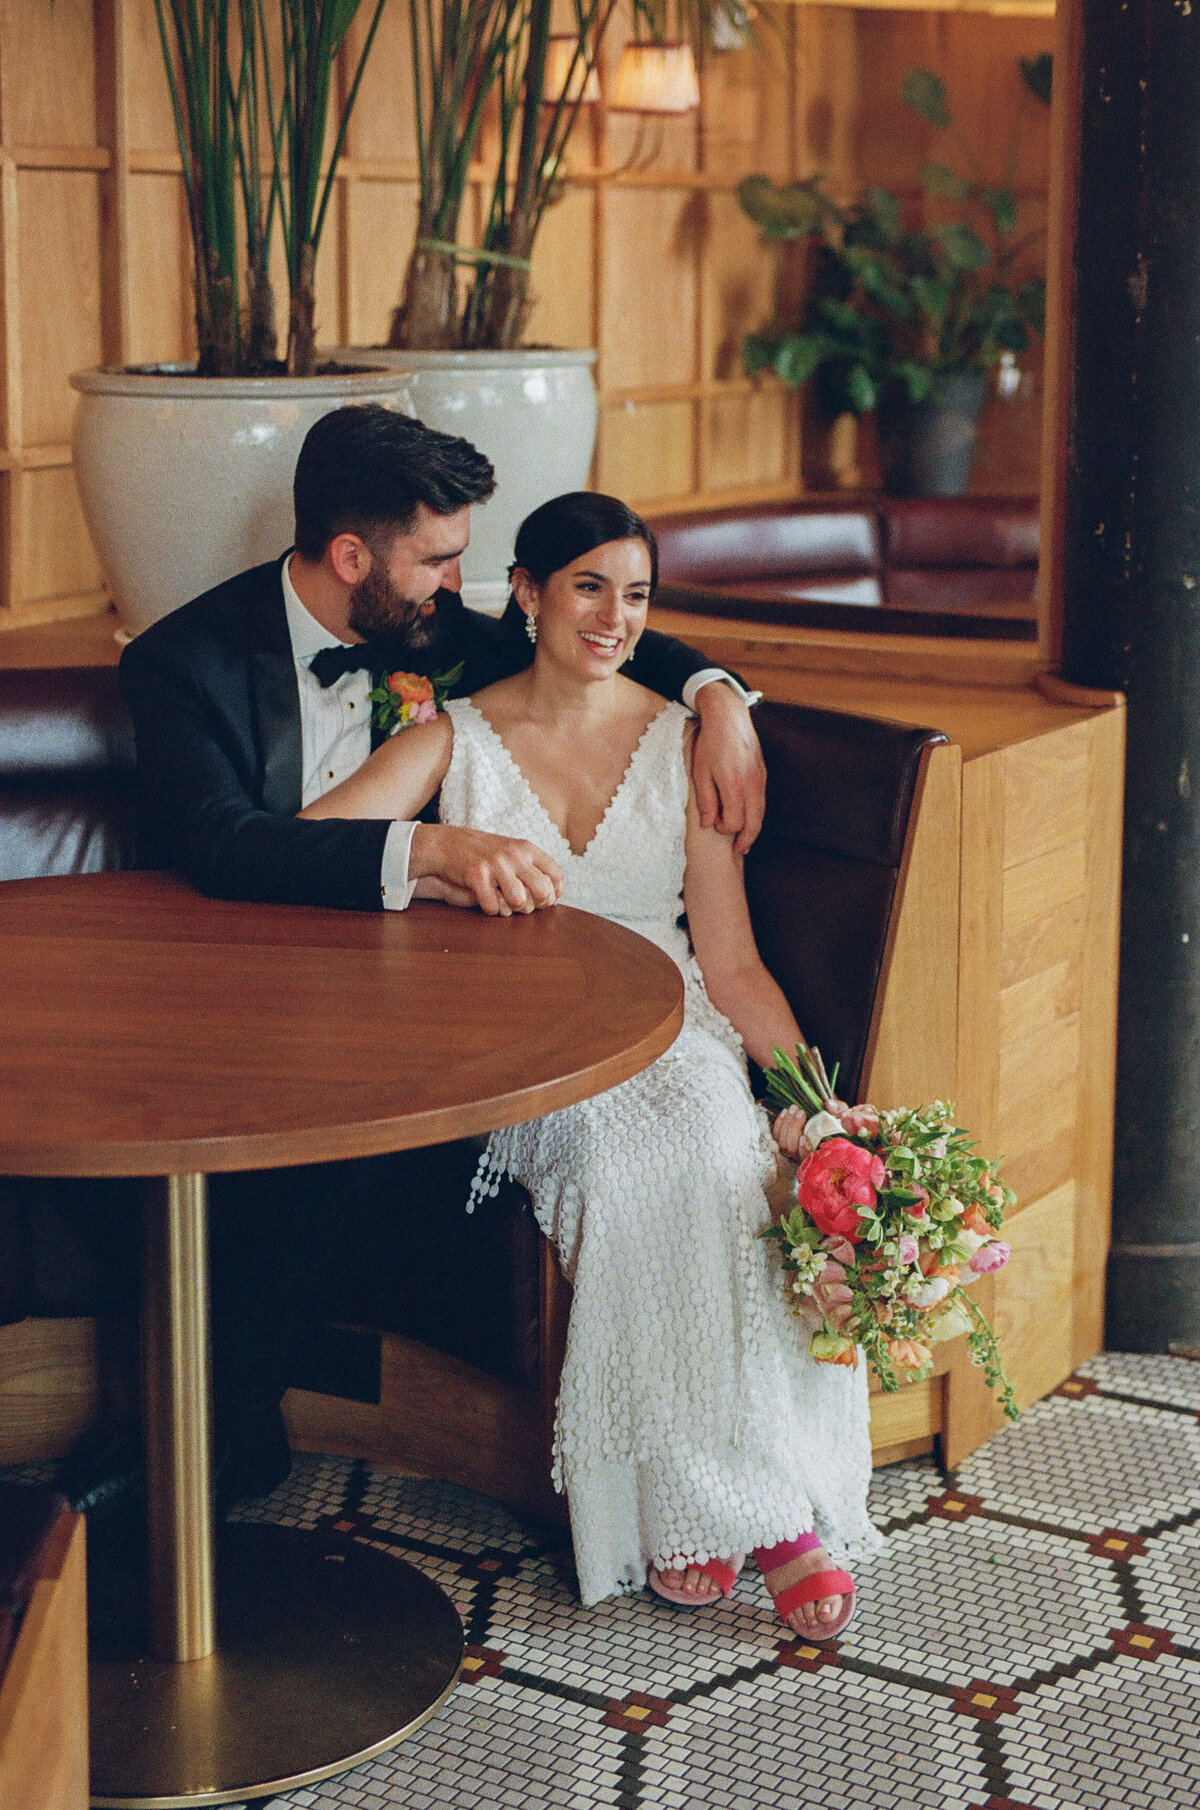 A bride and groom sitting in a booth together.